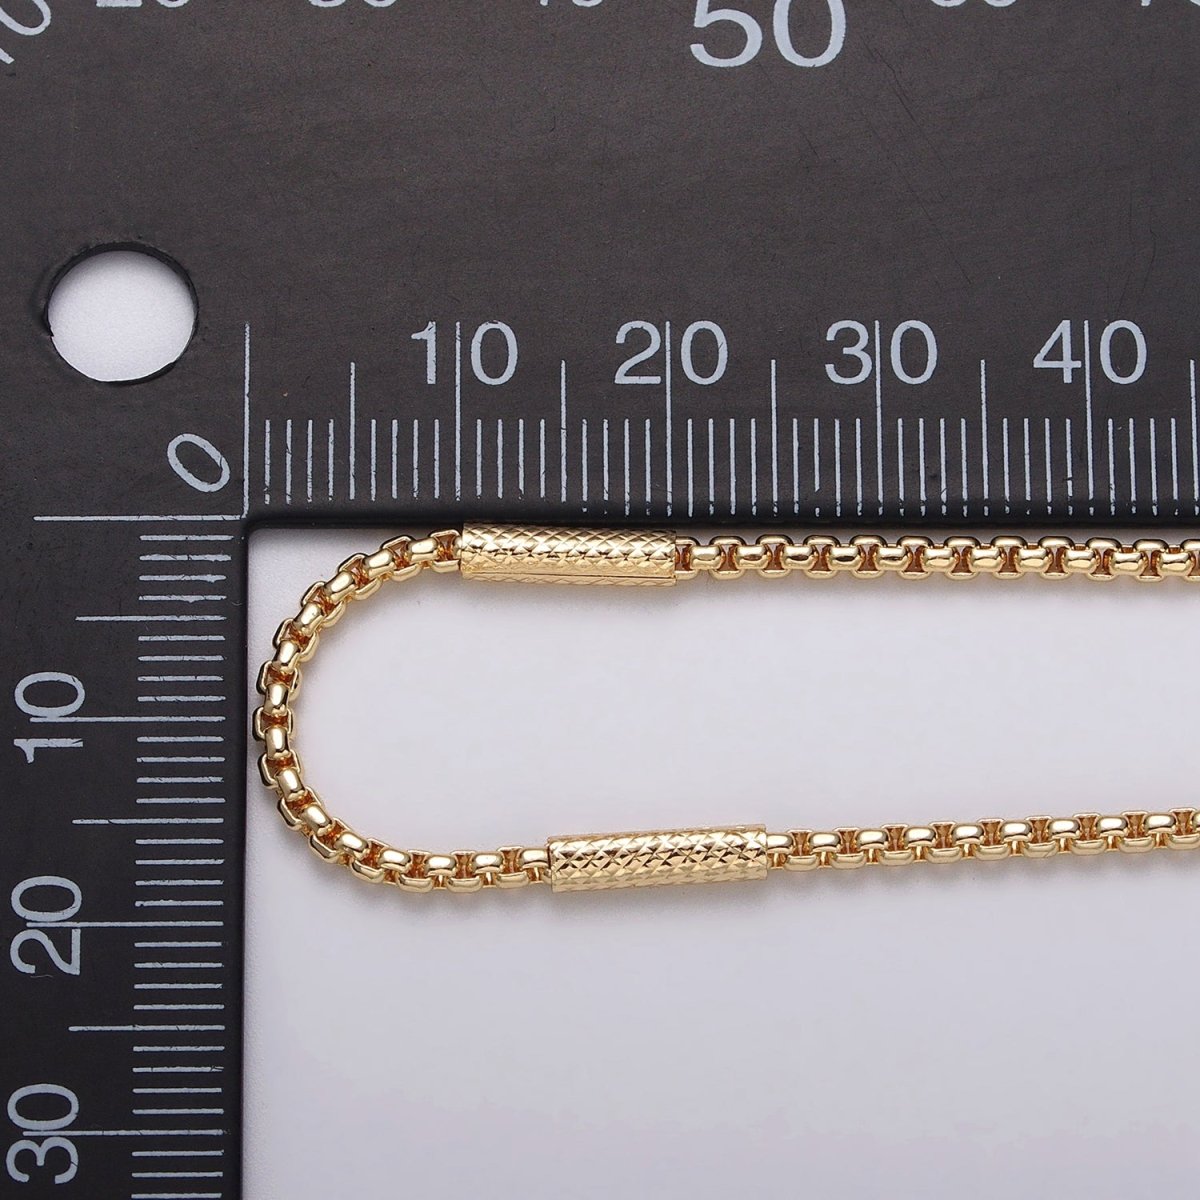 24K Gold Filled 2.5mm, 4mm Box Textured Tube Unique Unfinished Chain by Yard in Gold & Silver | ROLL-1055, -1056, ROLL-1102, -1117 Clearance Pricing - DLUXCA